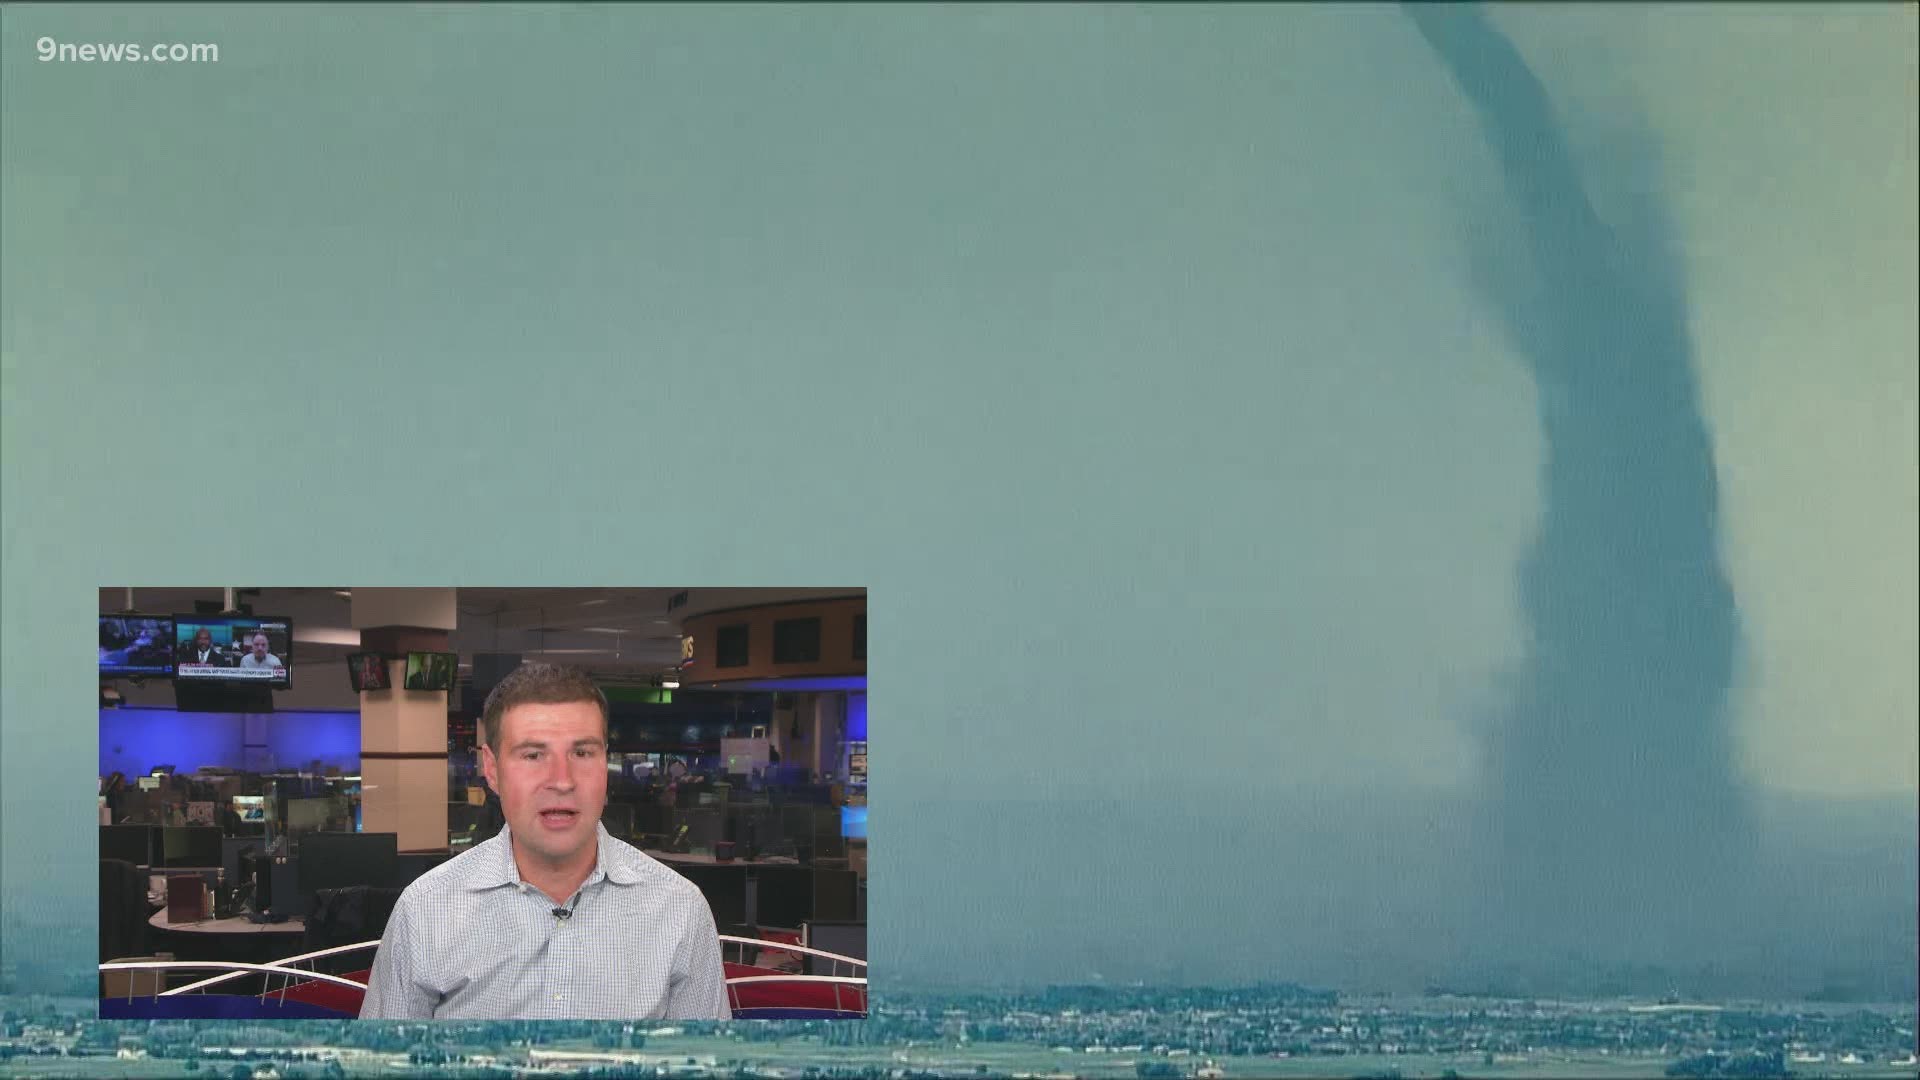 9NEWS Meteorologist Chris Bianchi discusses the landspout tornado in Weld County on Monday and how it formed so quickly.